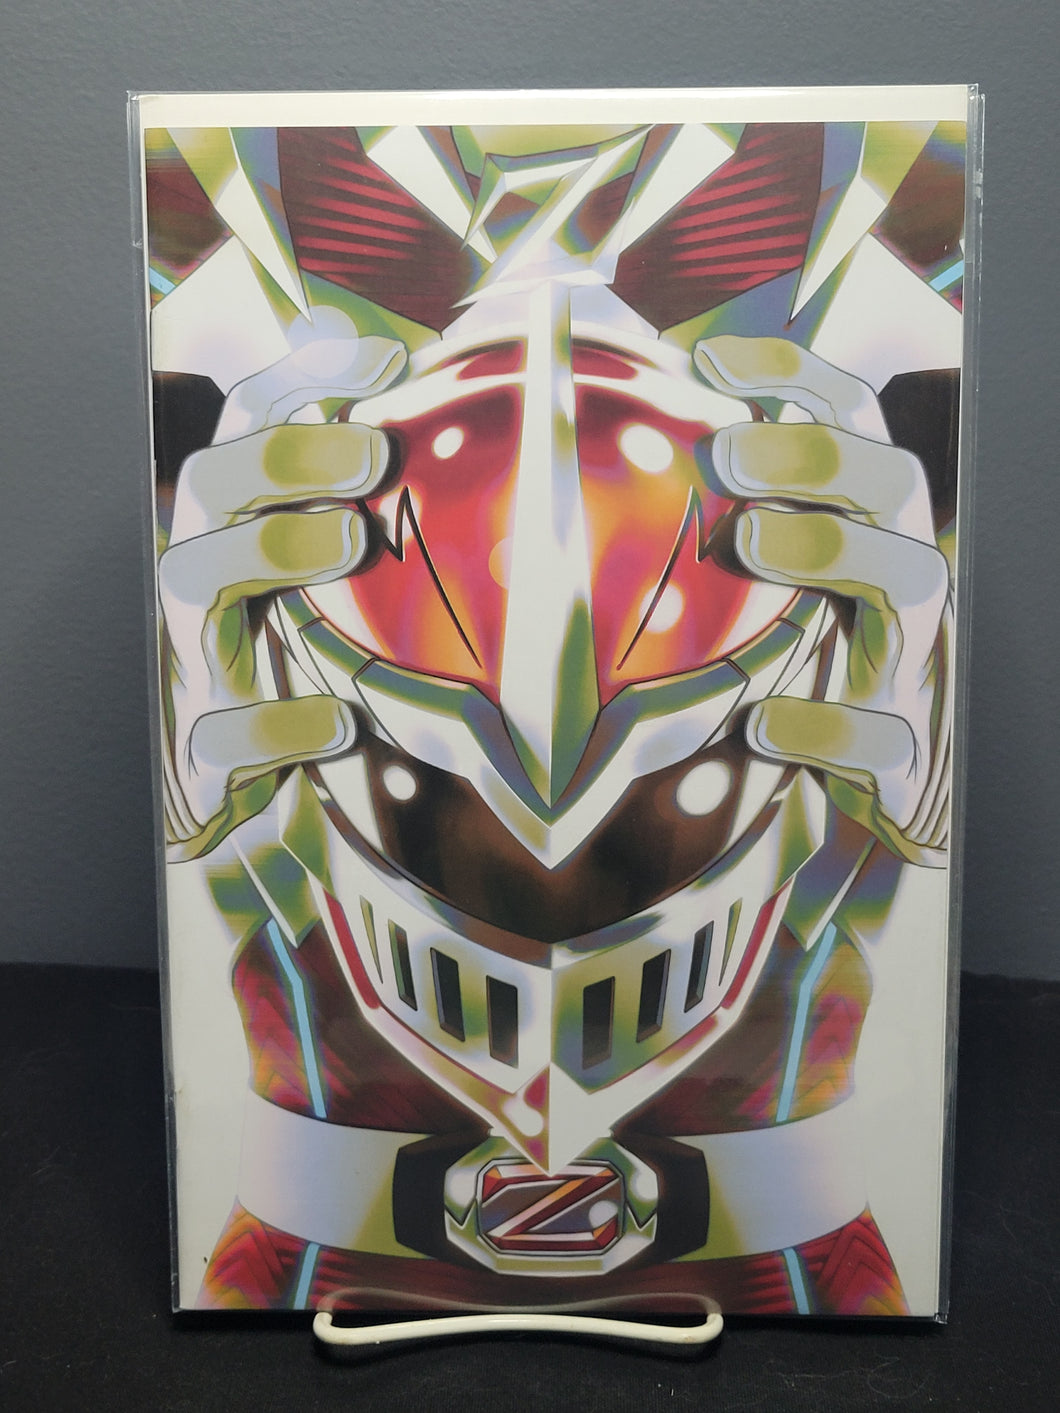 Mighty Morphin Power Rangers #112 1 Per Store Variant